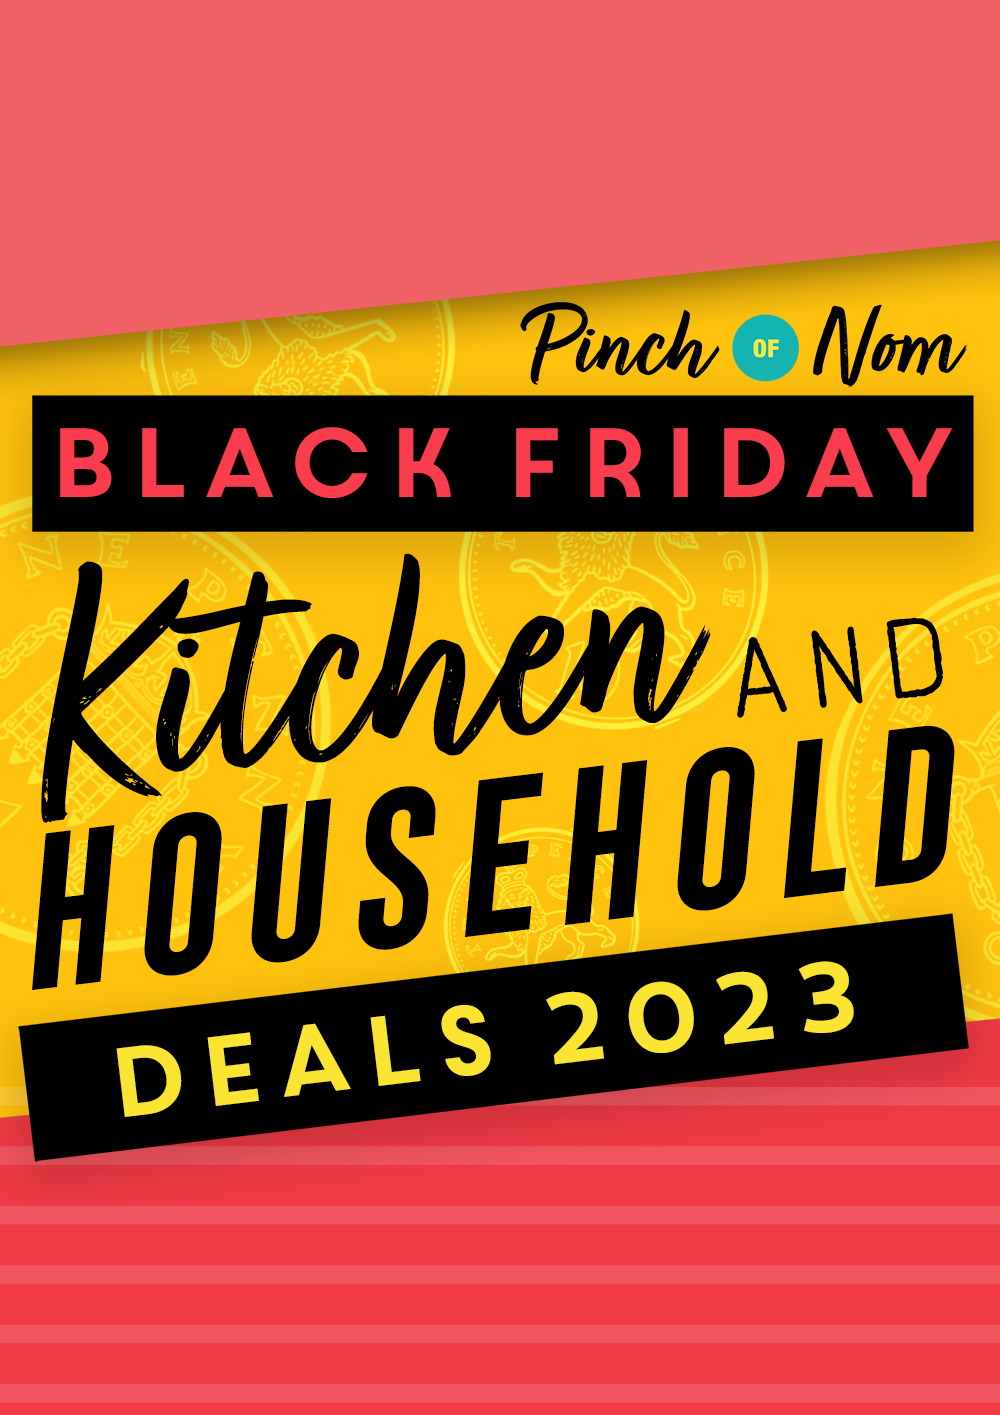 Black Friday Kitchen And Household Deals 2023 FEATURED 